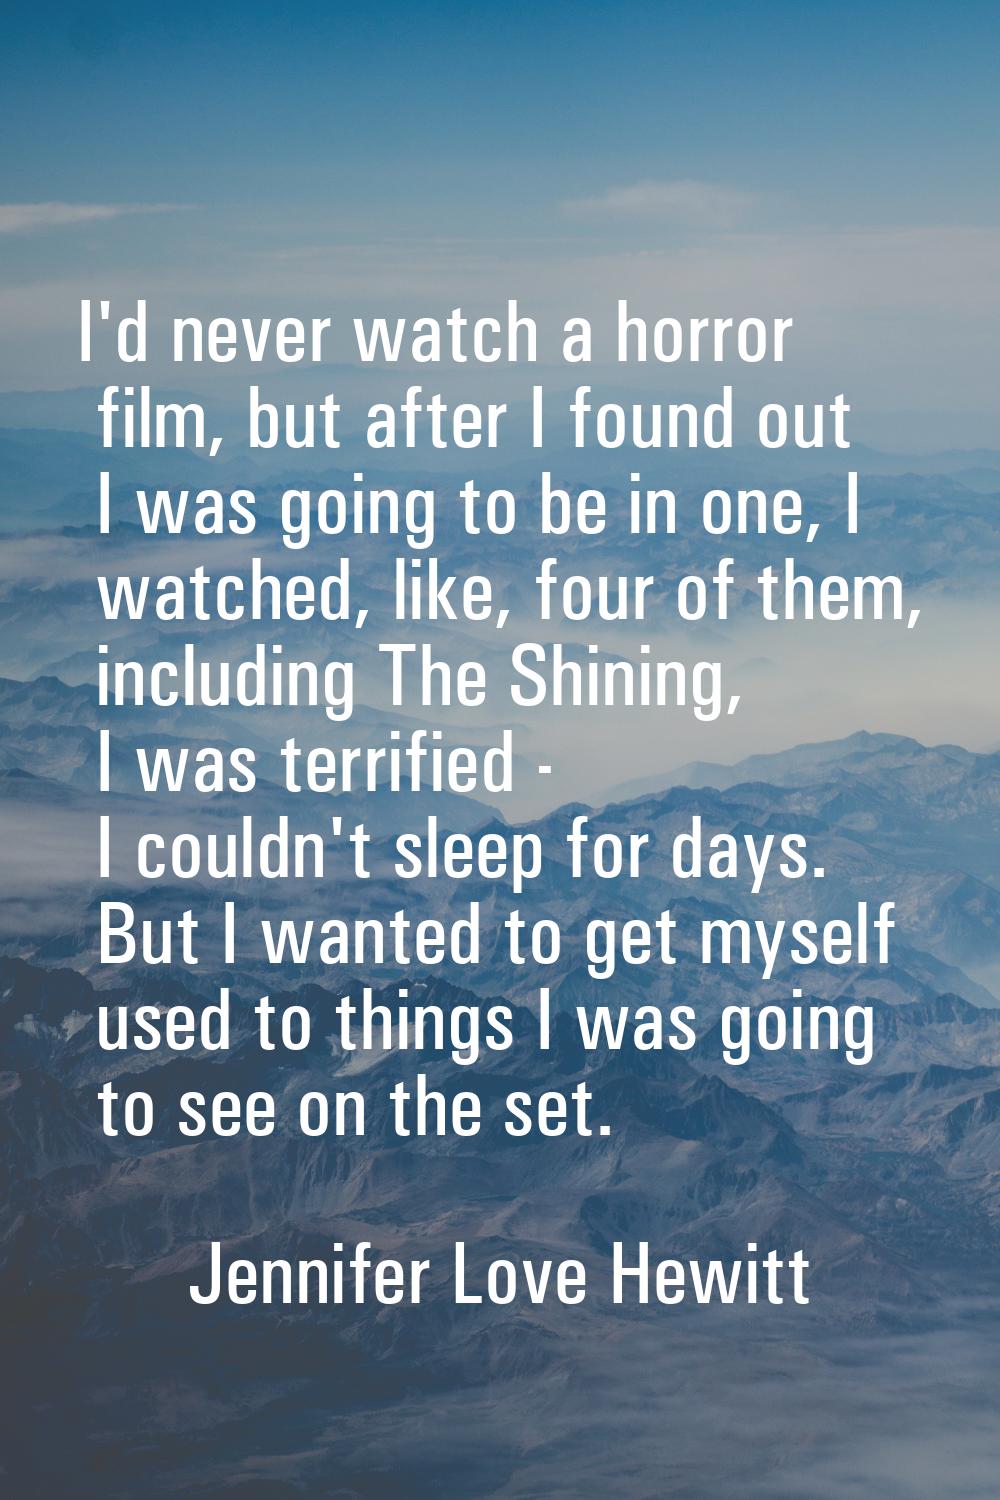 I'd never watch a horror film, but after I found out I was going to be in one, I watched, like, fou